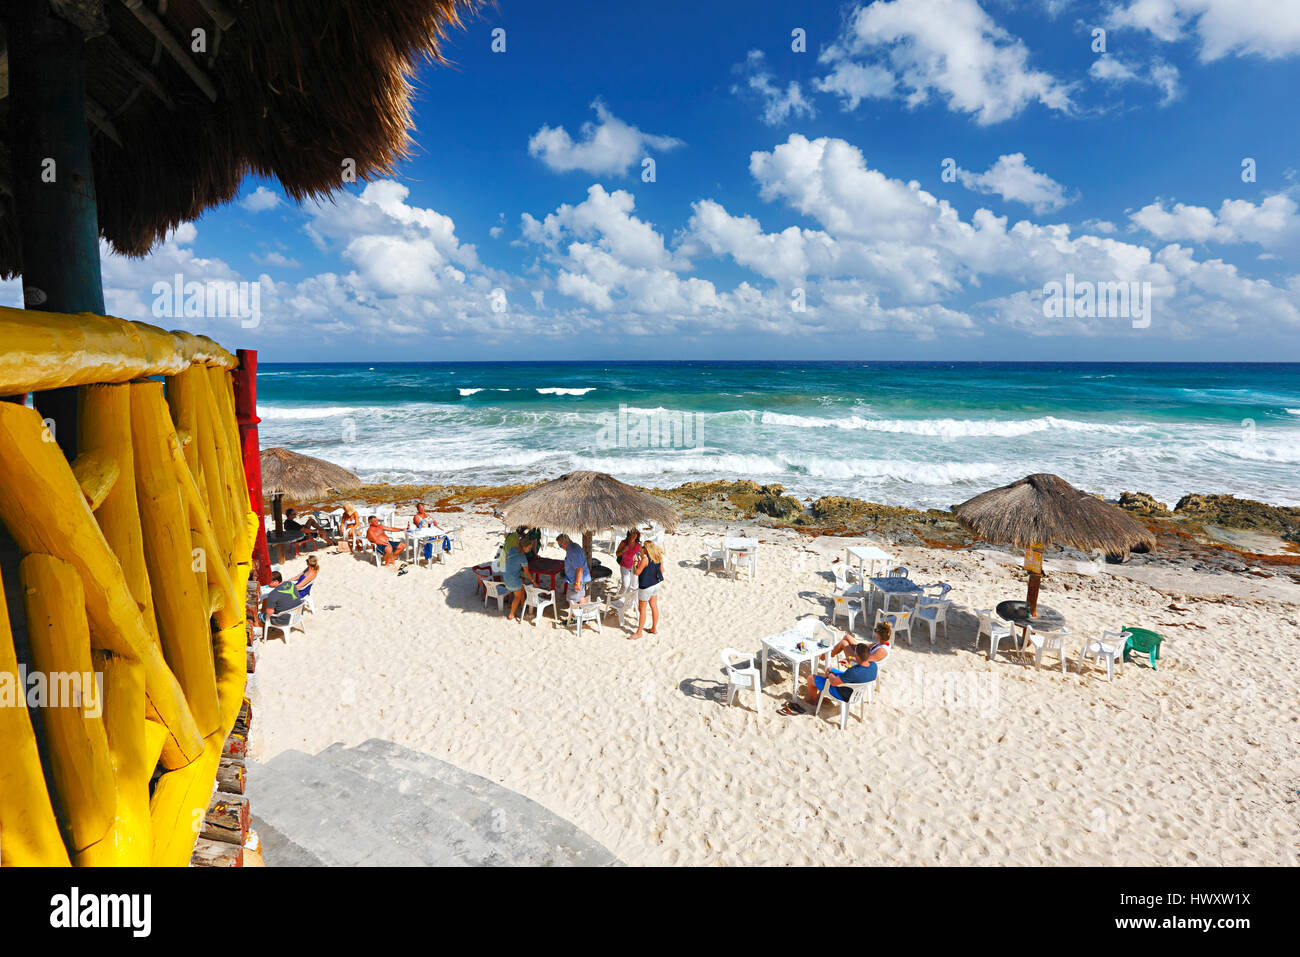 Sunny day with cloudy sky on sand beach with straw umbrellas and tourists on Cozumel Stock Photo